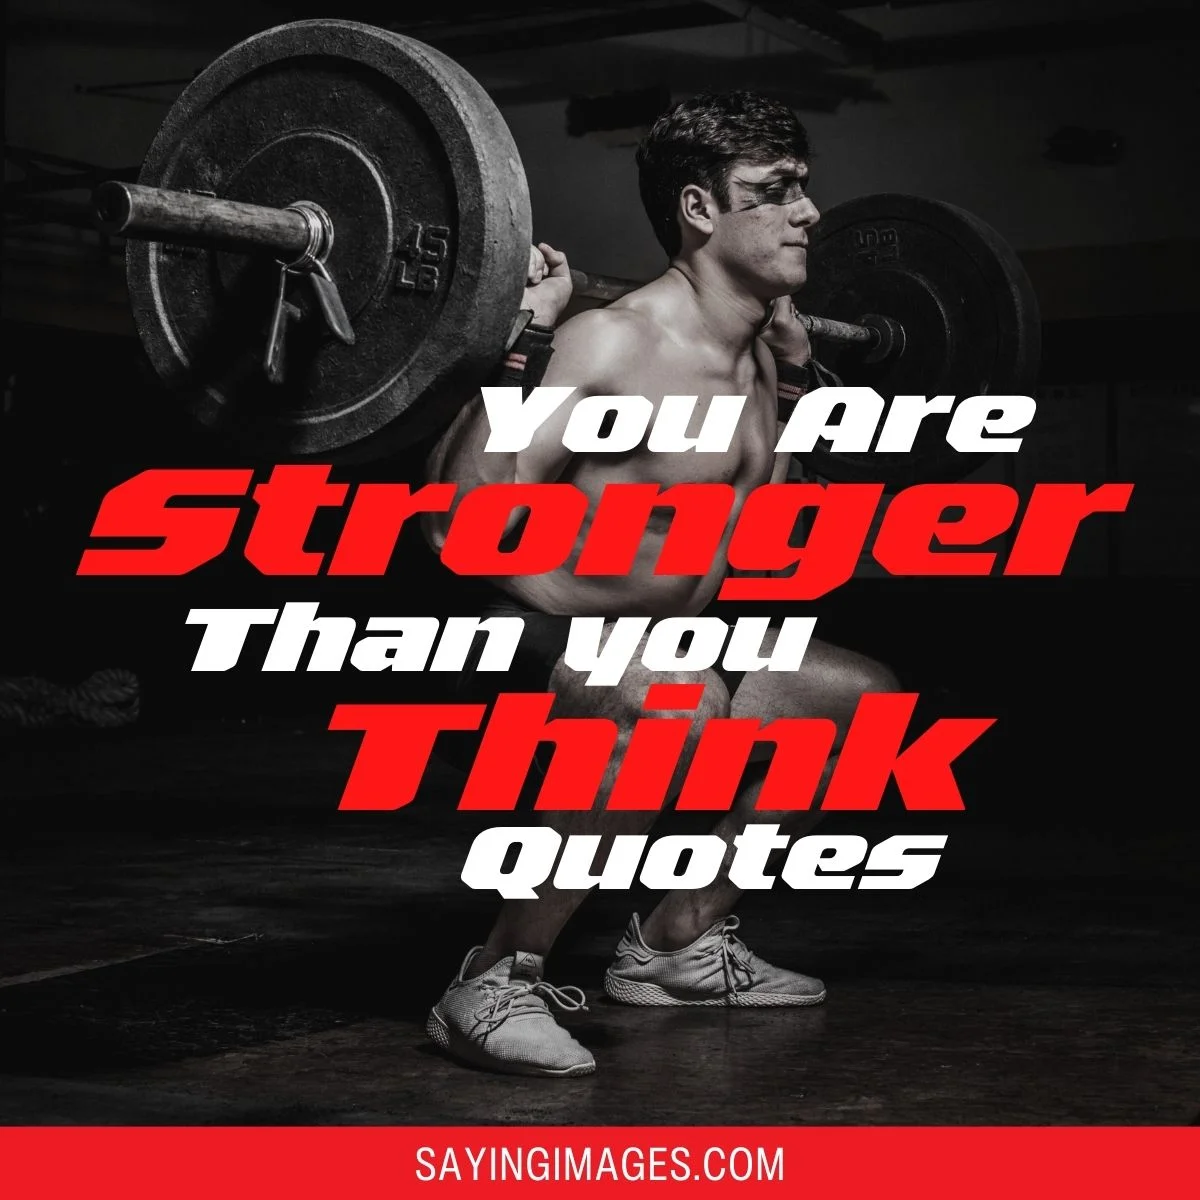 Quotes to Remind You That You Are So Much Stronger Than You Think